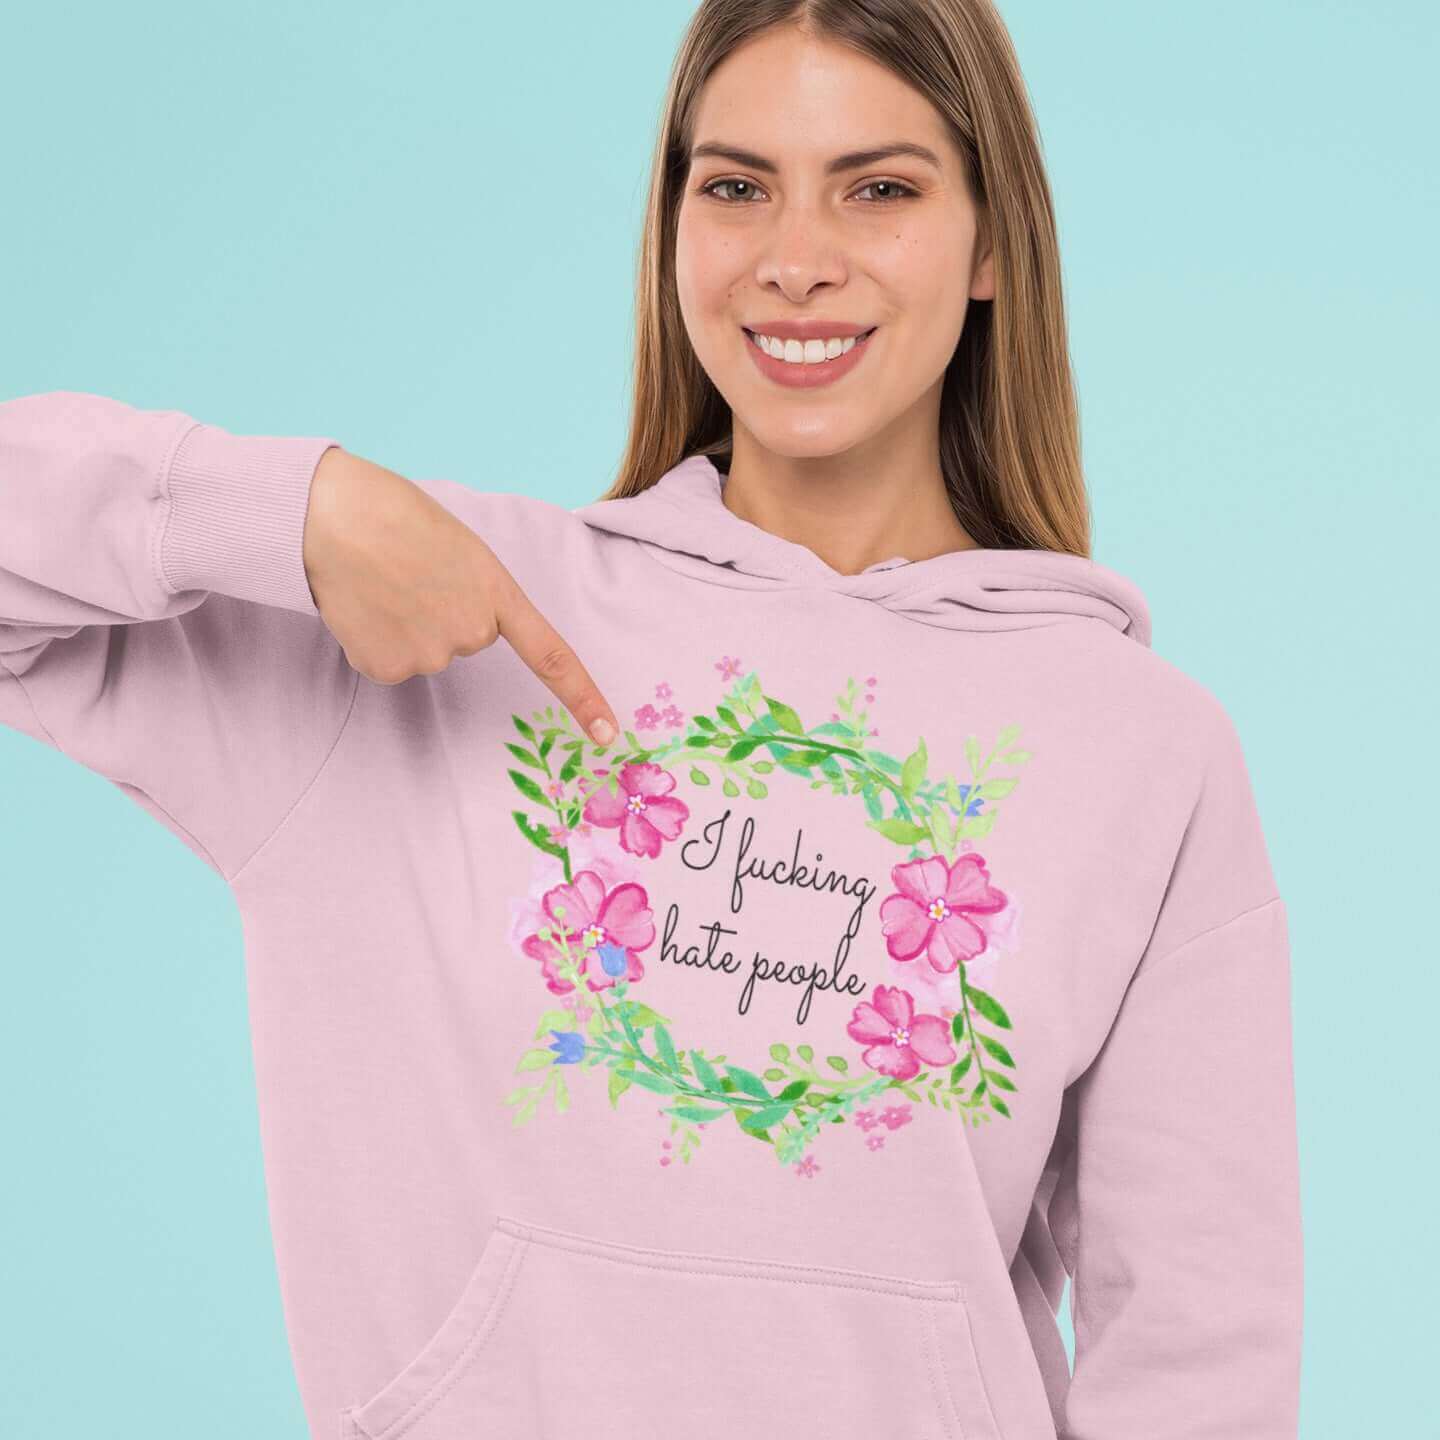 Woman wearing light pink hooded sweatshirt with pink and green floral wreath image and the words I fucking hate people printed on the front.